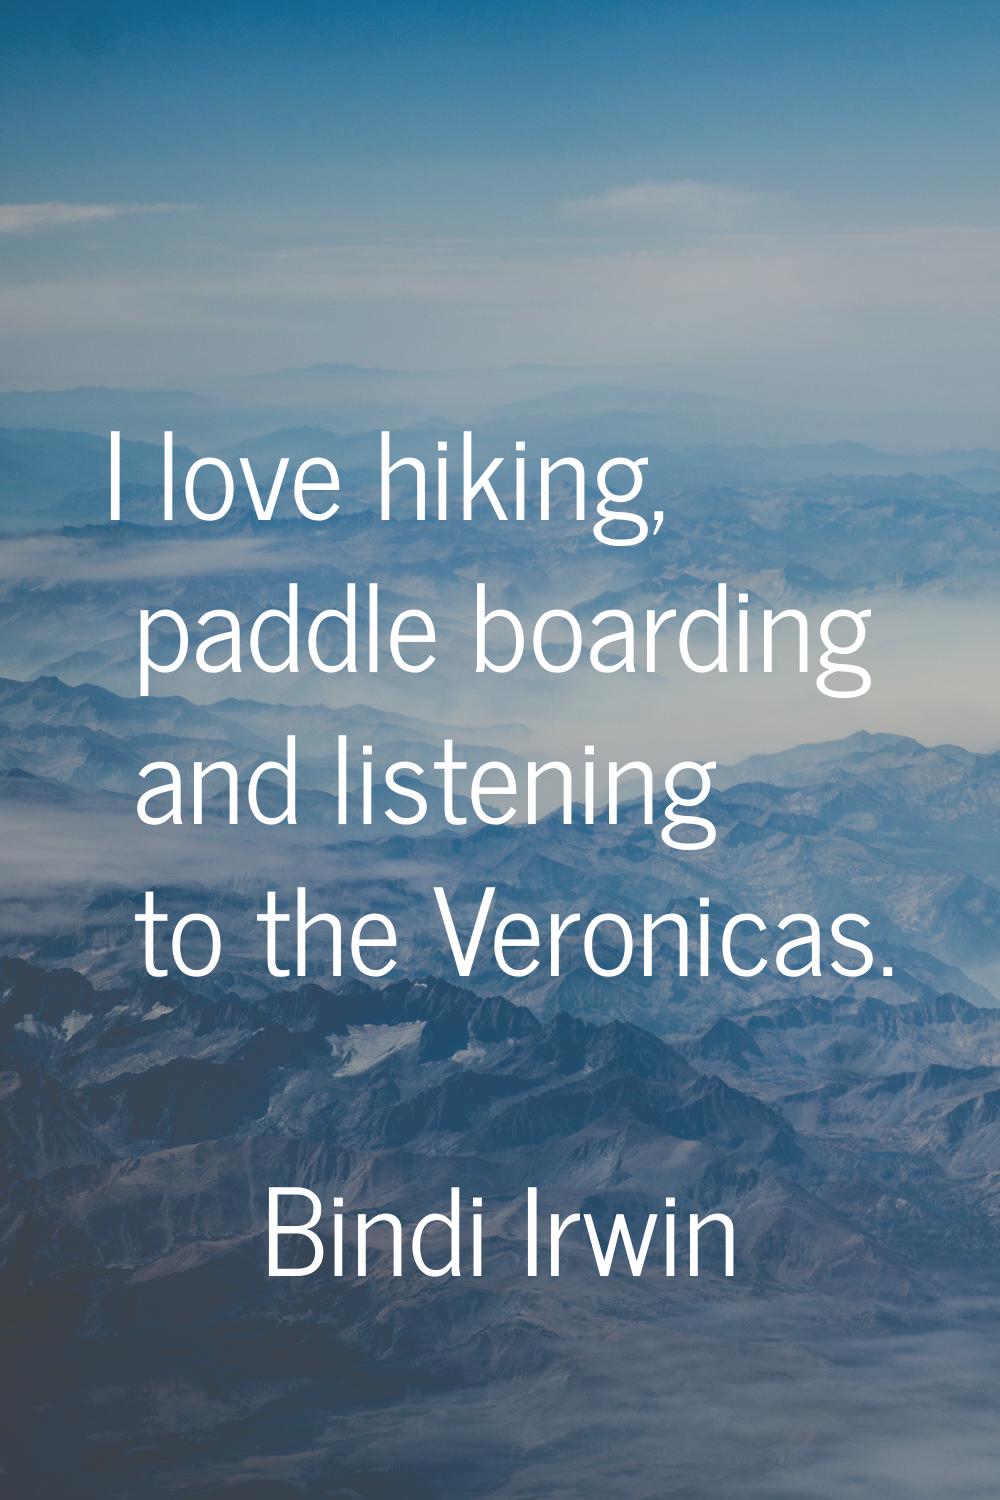 I love hiking, paddle boarding and listening to the Veronicas.